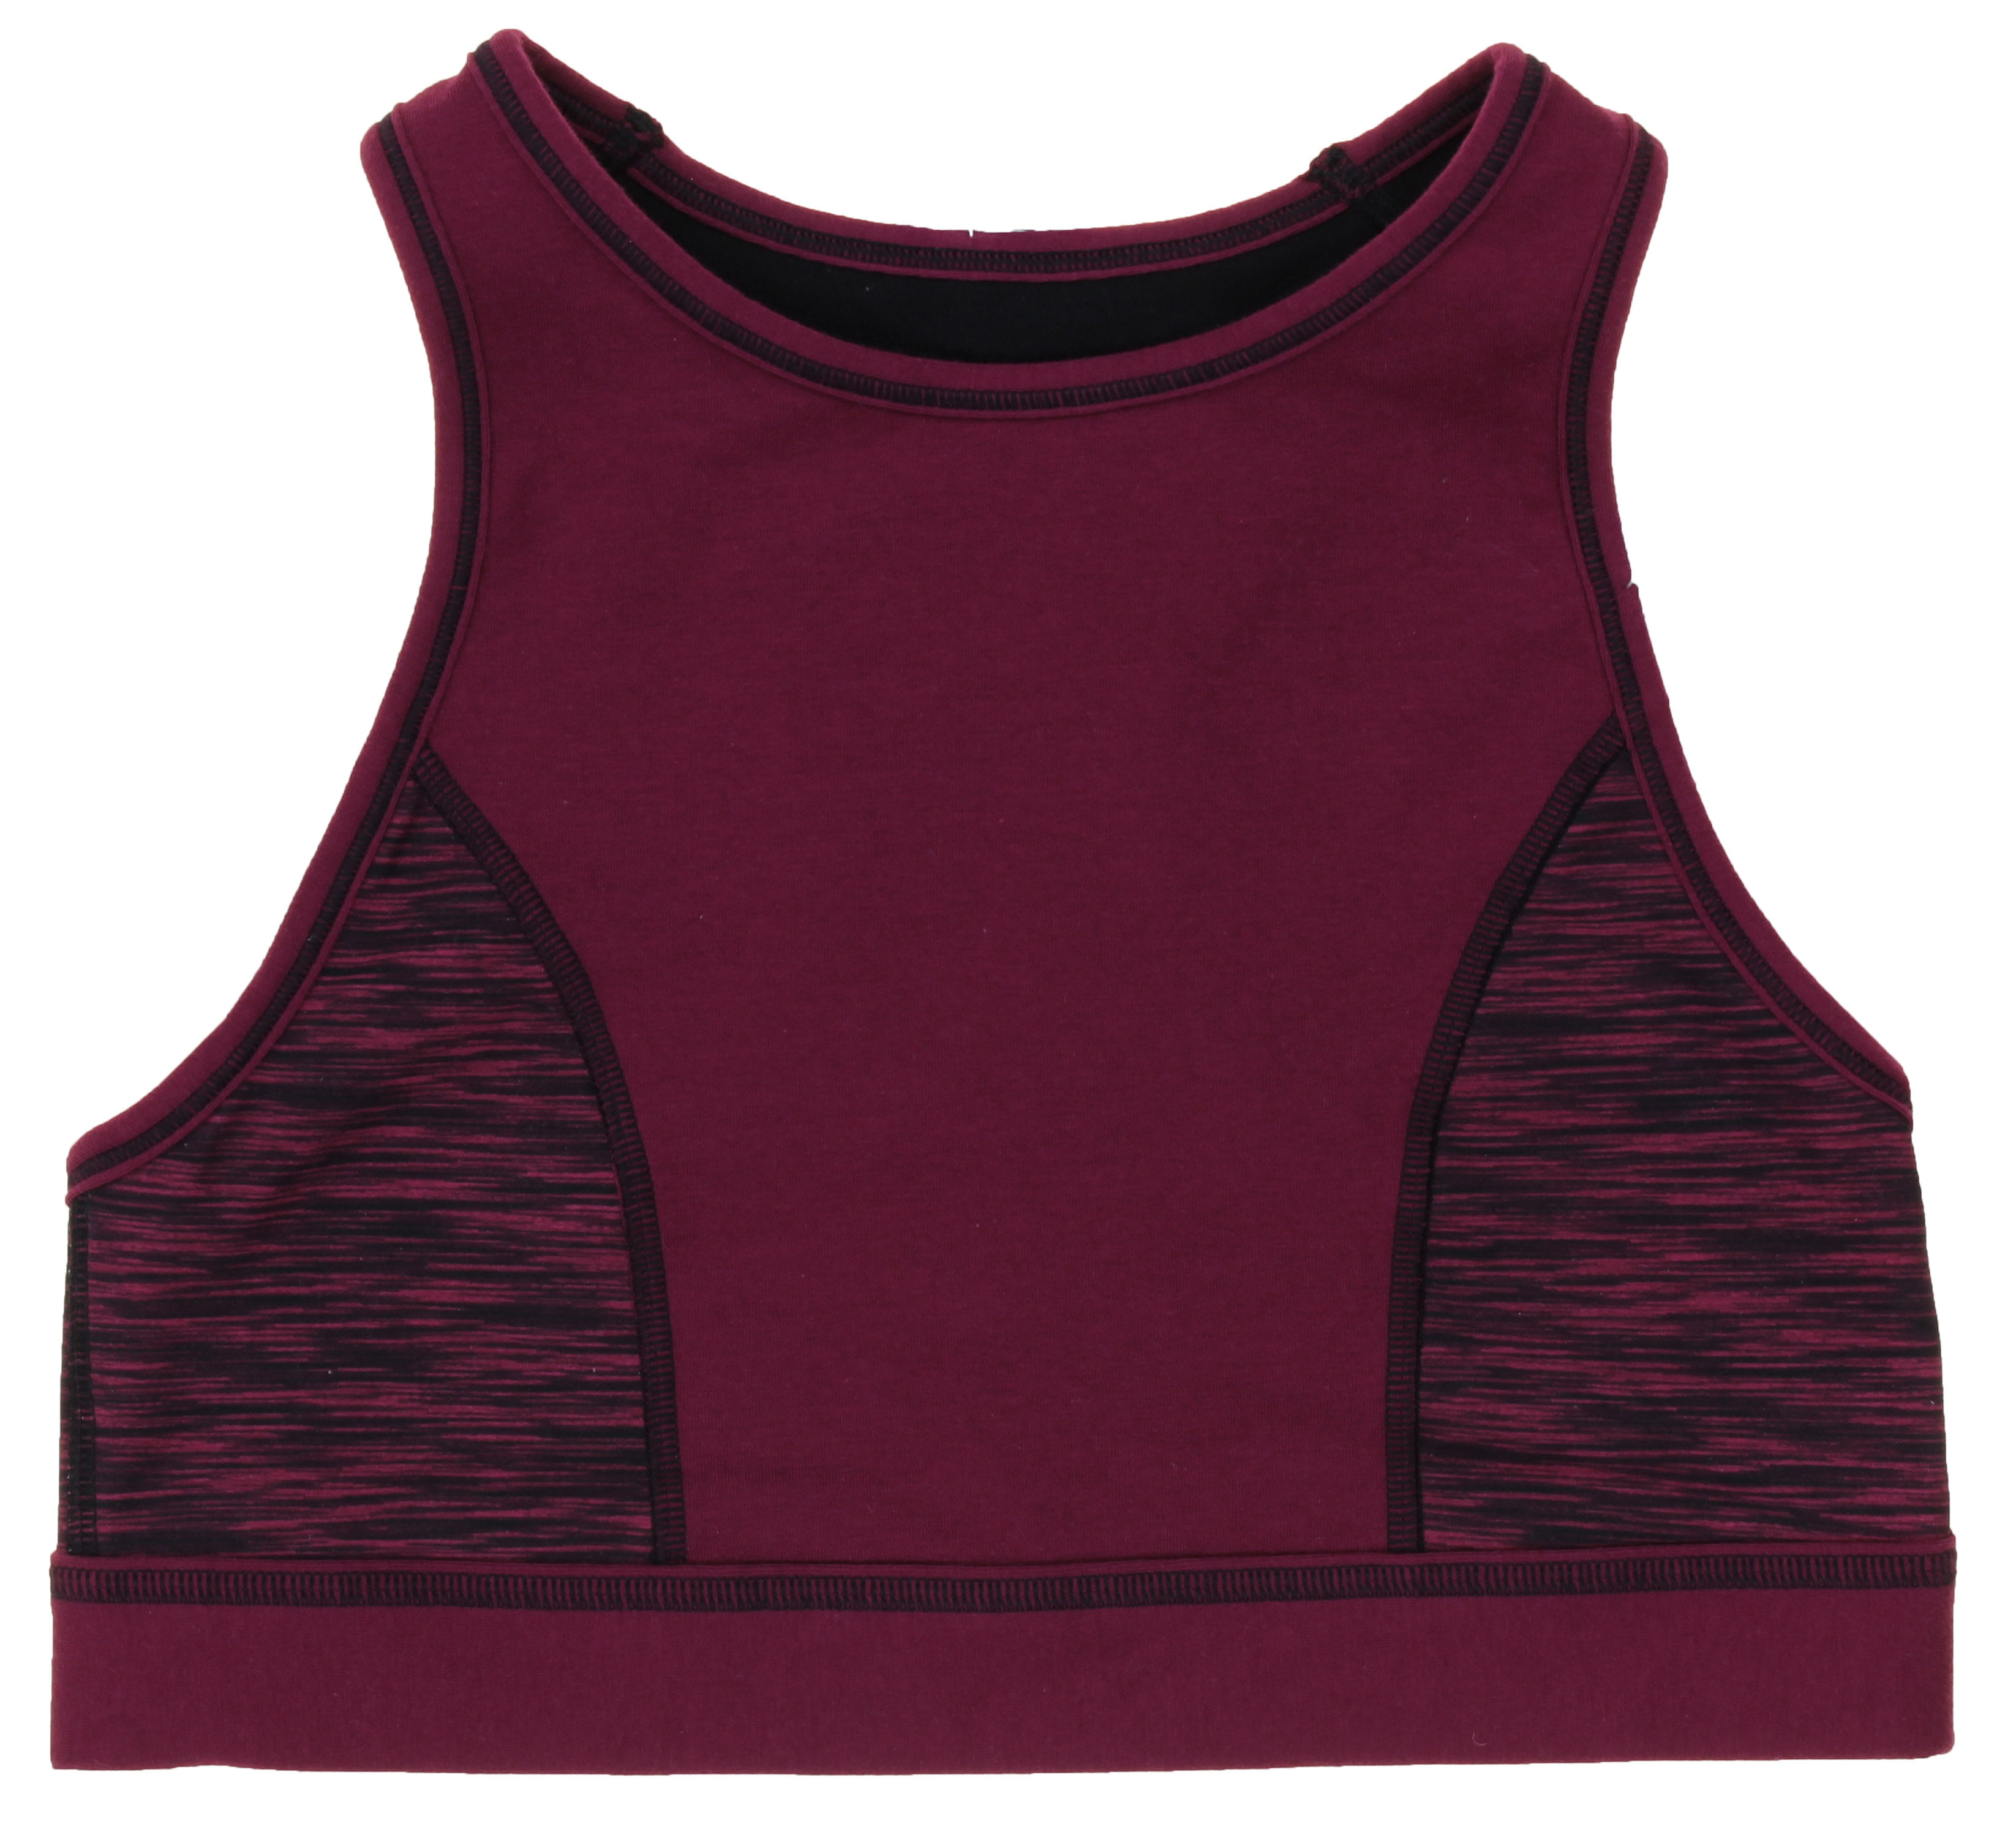 Details about   NWT VICTORIA'S SECRET MAROON PINK SNAKE PYTHON INCREDIBLE LIGHTWEIGHT SPORTS BRA 